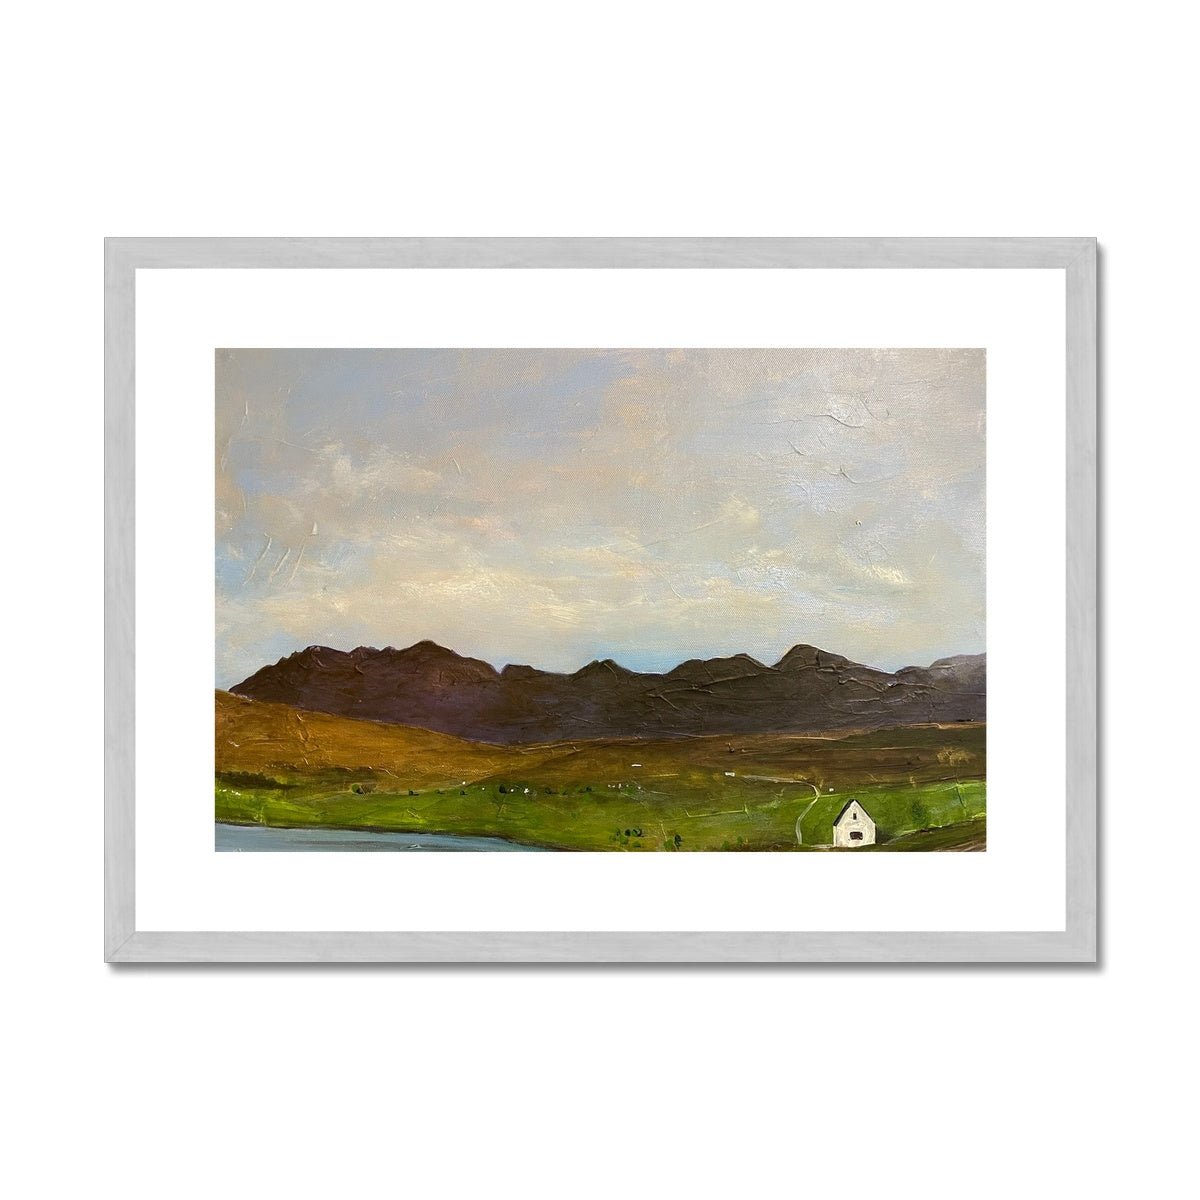 The Road To Carbost Skye Painting | Antique Framed & Mounted Prints From Scotland-Antique Framed & Mounted Prints-Skye Art Gallery-A2 Landscape-Silver Frame-Paintings, Prints, Homeware, Art Gifts From Scotland By Scottish Artist Kevin Hunter